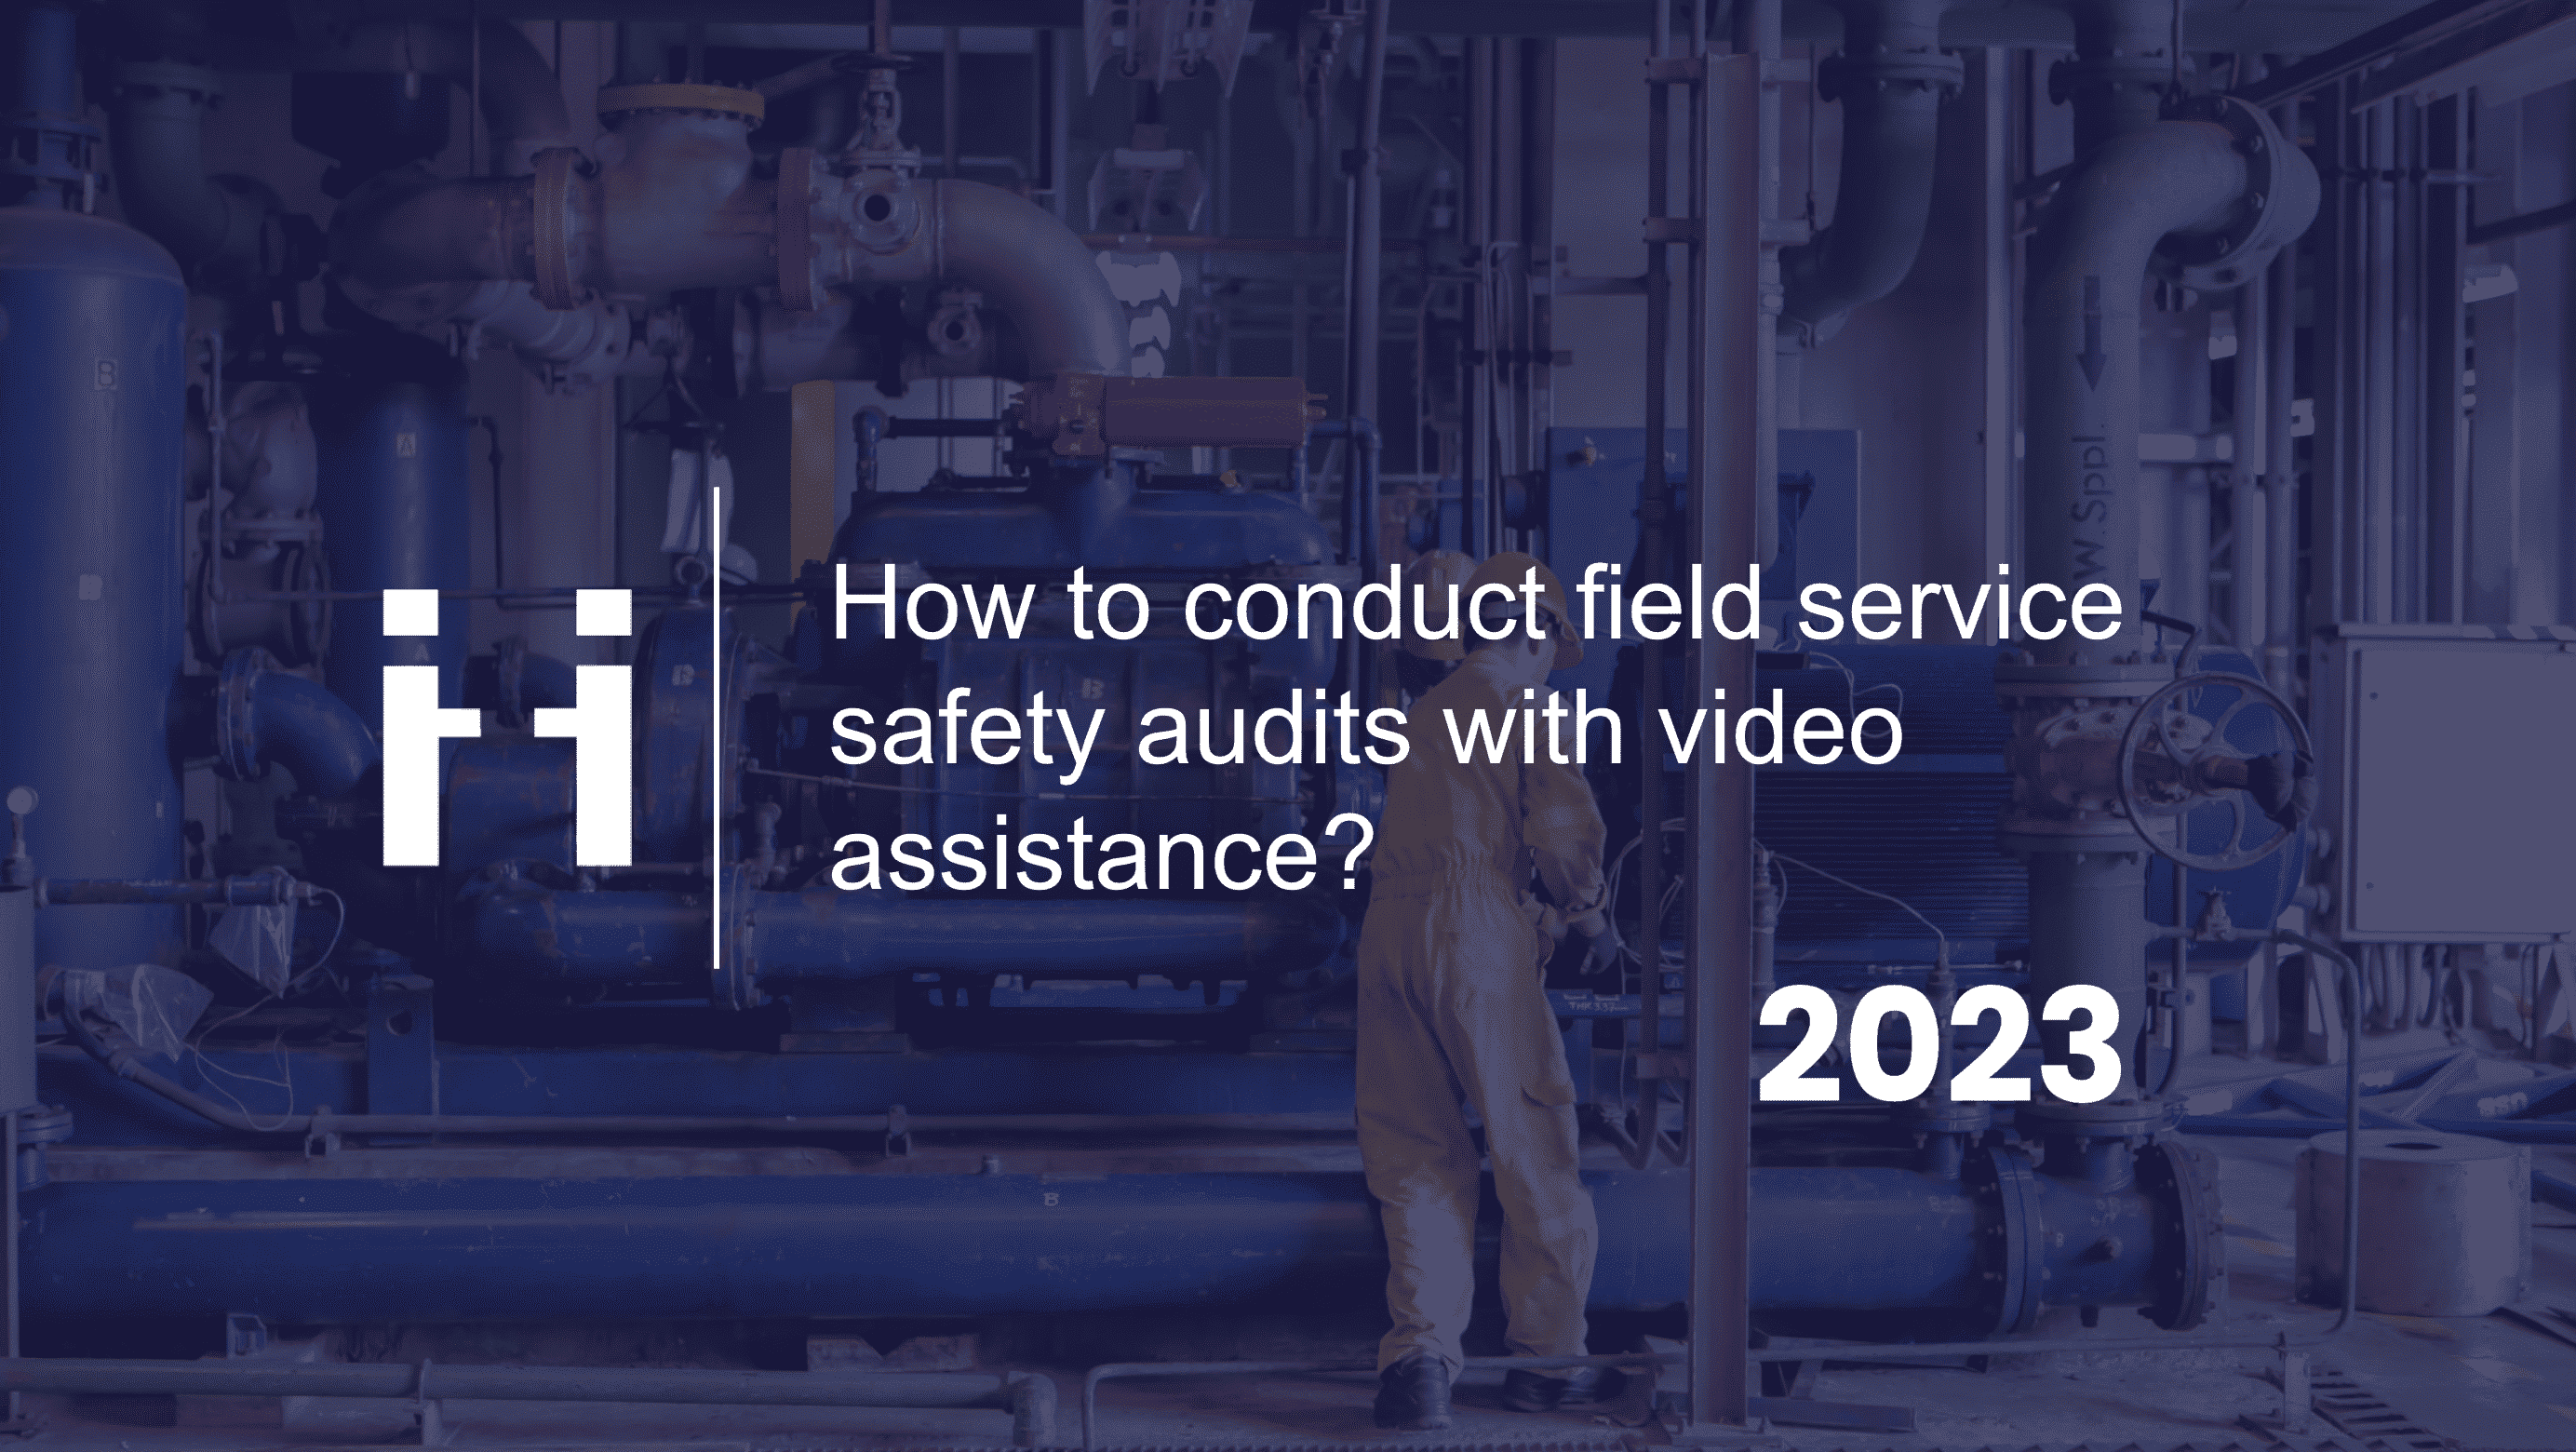 field service safety audits with video assistance